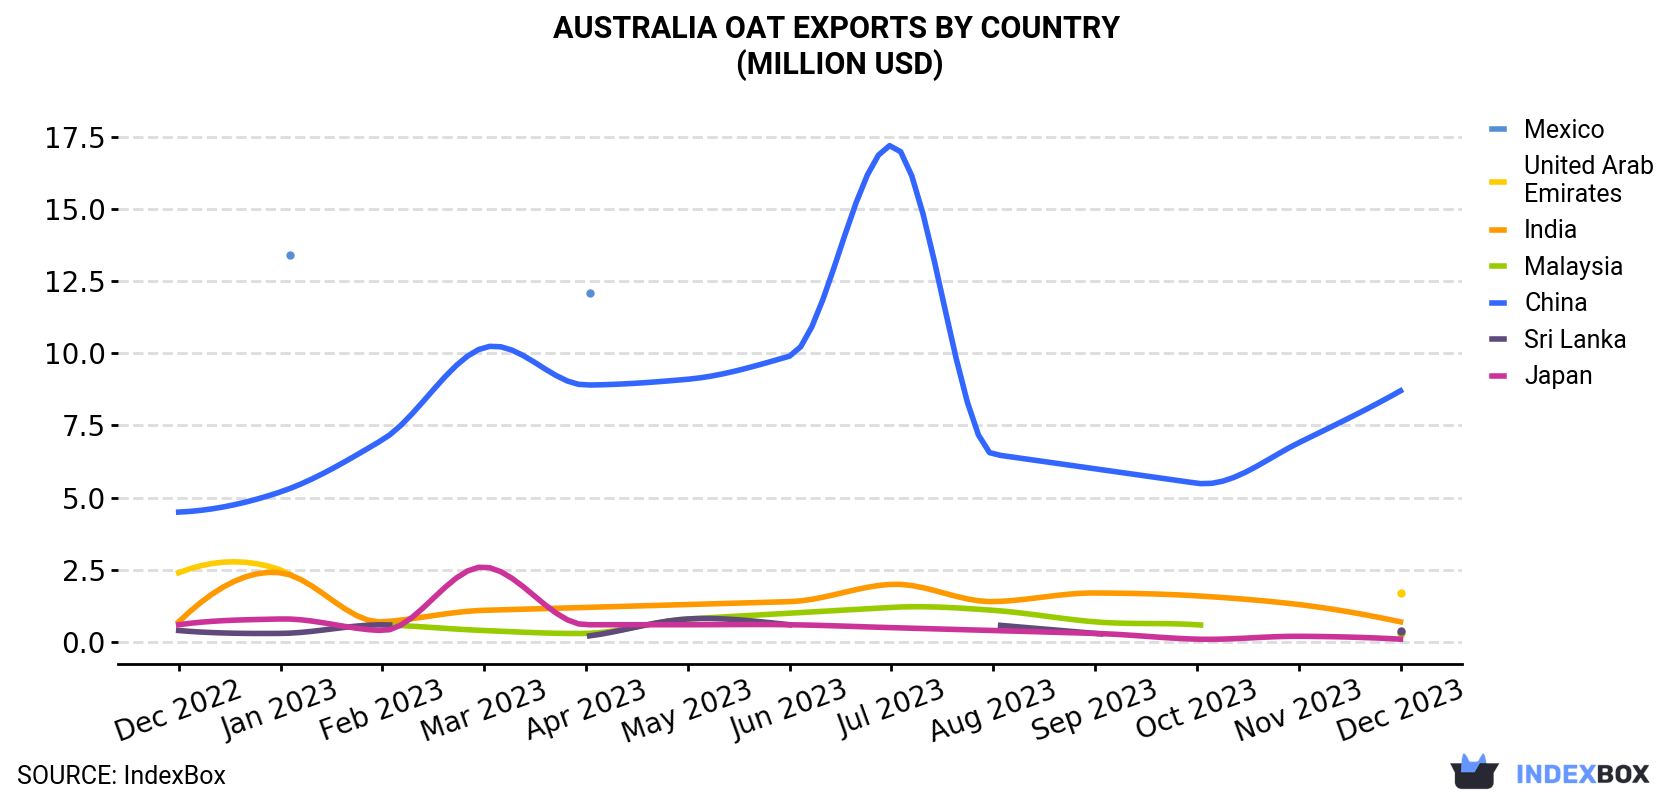 Australia Oat Exports By Country (Million USD)